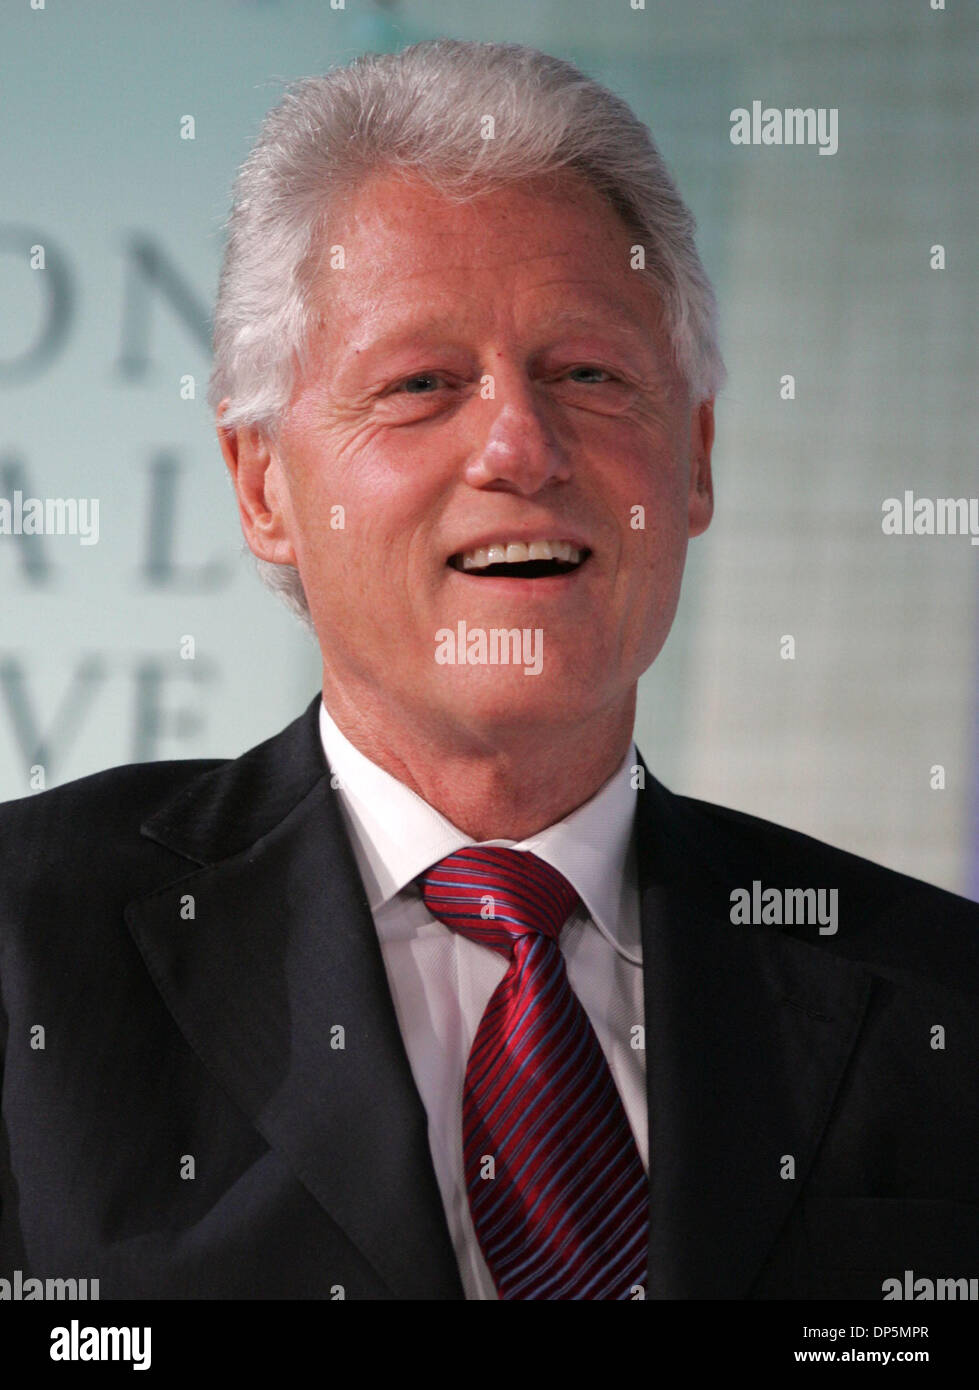 Sep 20, 2006; New York, NY, USA; 42nd President of the United States BILL CLINTON at the Clinton Global Initiative 2006 Annual Meeting held at the New York Sheraton Hotel Mandatory Credit: Photo by Nancy Kaszerman/ZUMA Press. (©) Copyright 2006 by Nancy Kaszerman Stock Photo